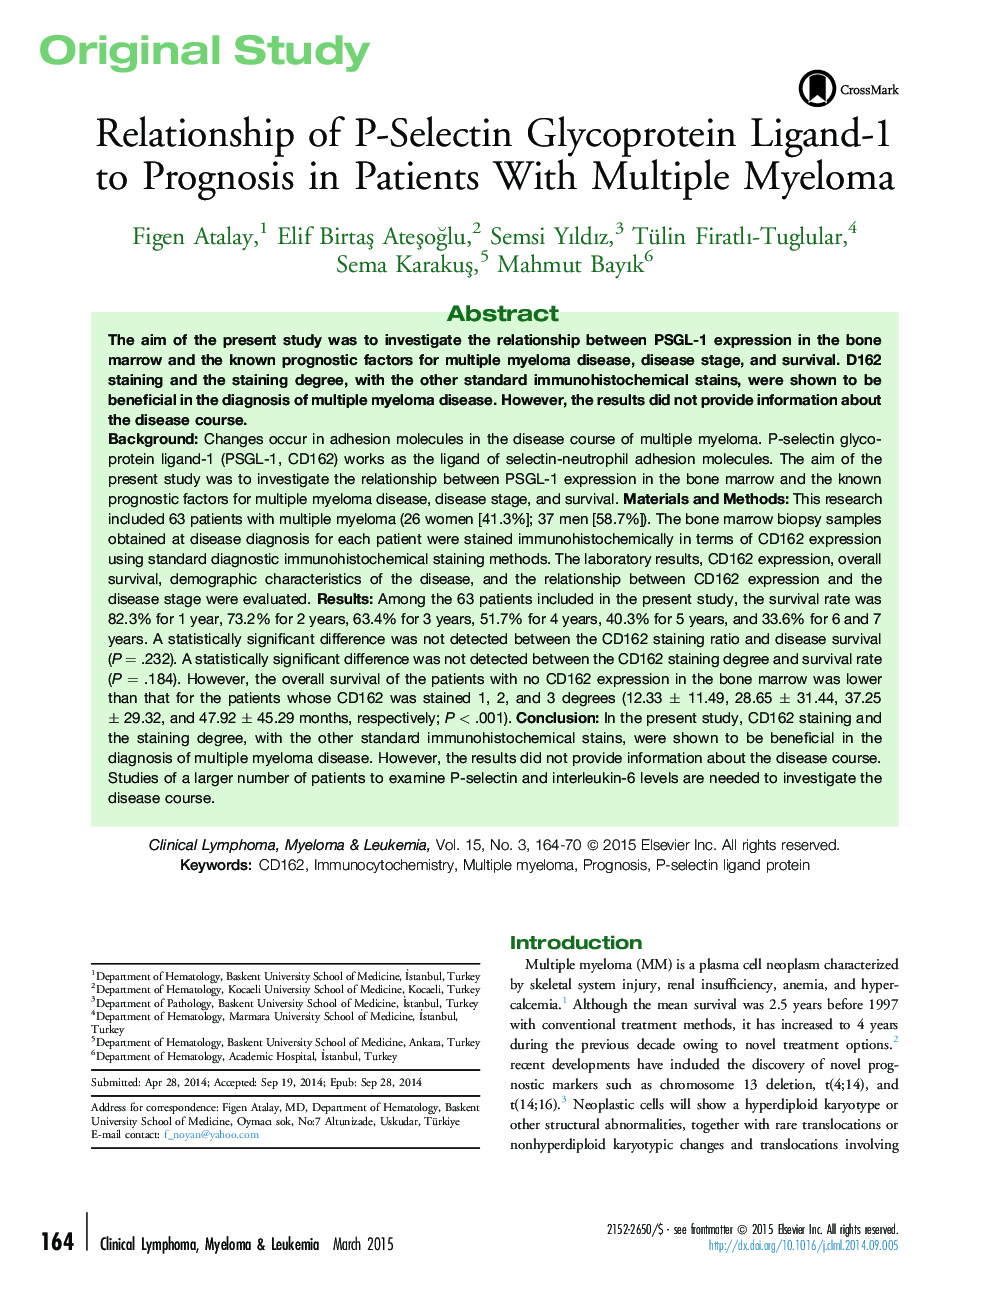 Relationship of P-Selectin Glycoprotein Ligand-1 to Prognosis in Patients With Multiple Myeloma